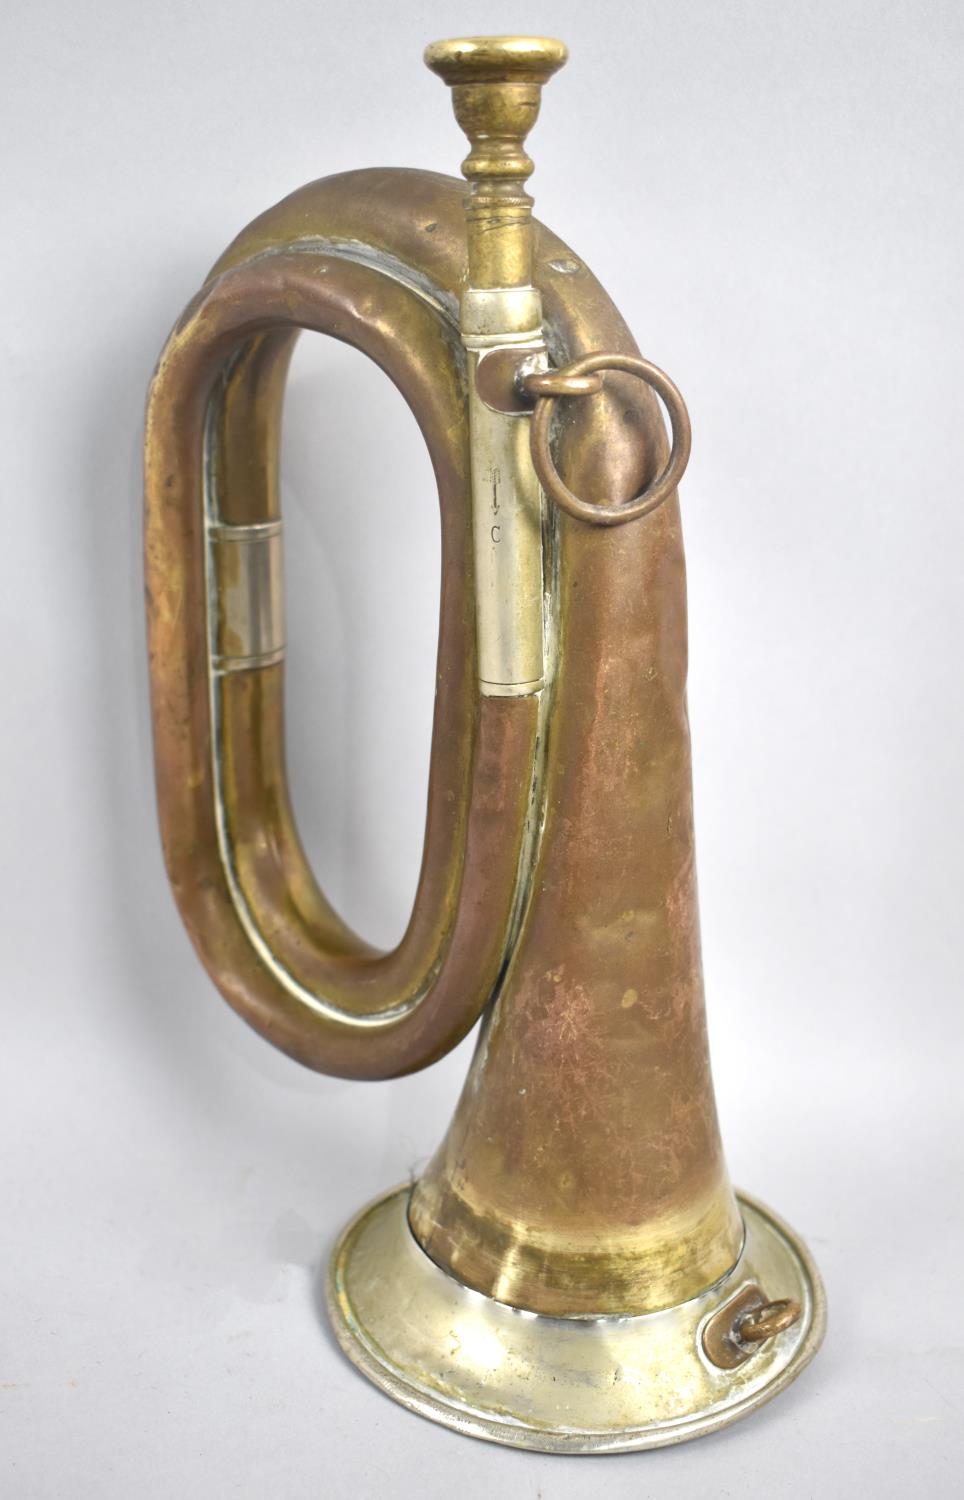 A World War One Period German Bugle, the Mouthpiece Holder Stamped with Arrow and C, Missing One